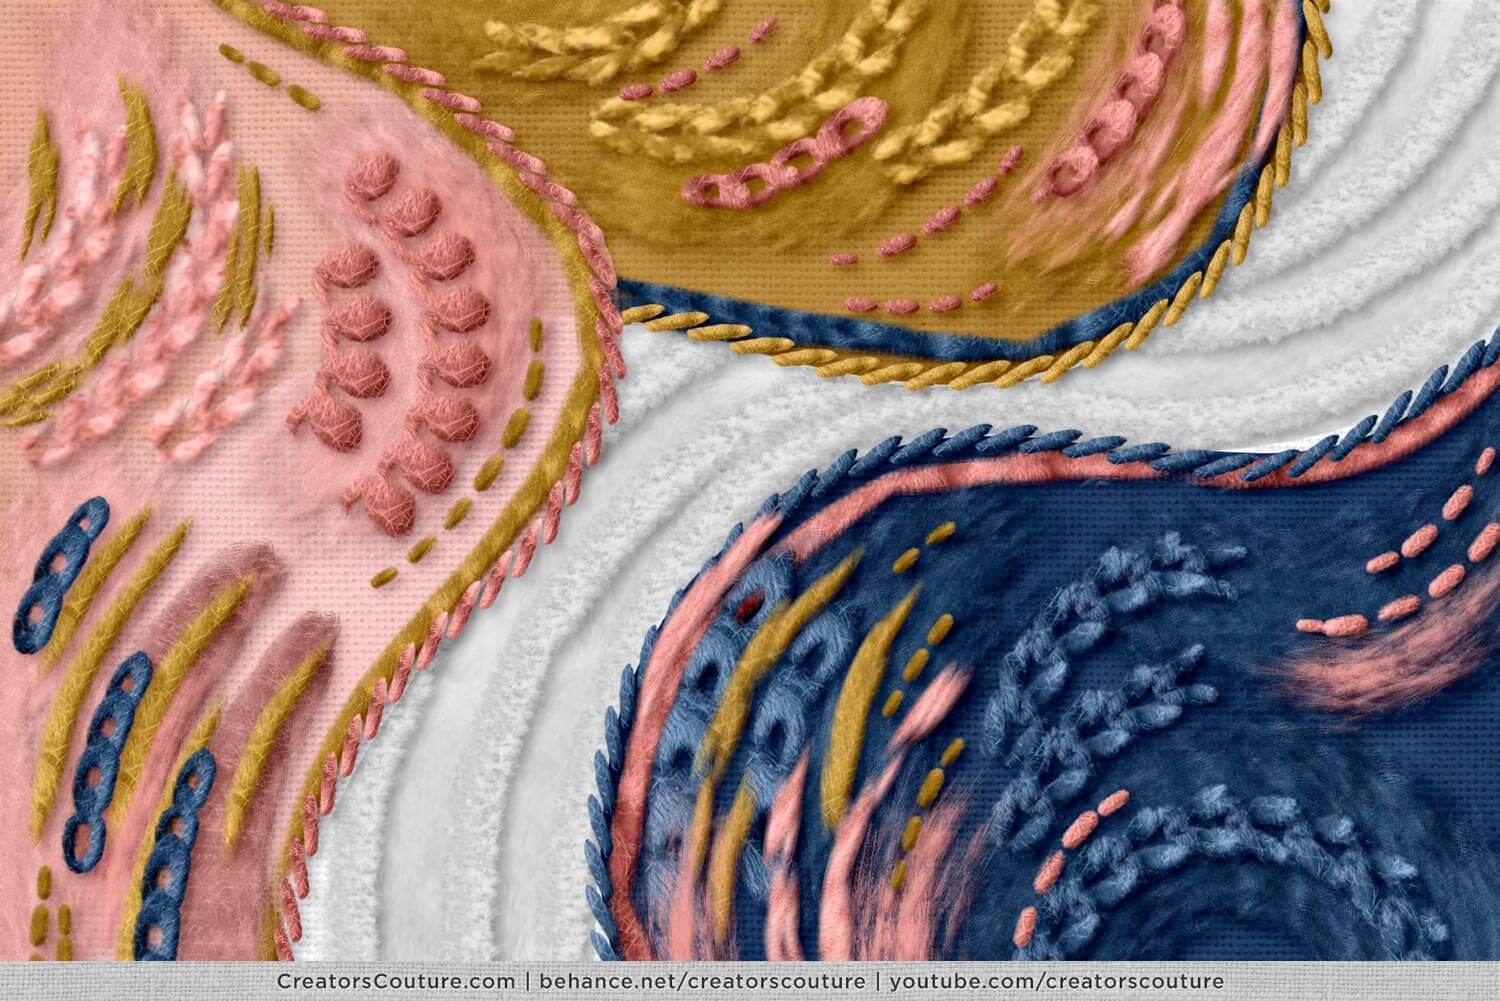 modern abstract thread painting style illustration created using embroidery and thread photoshop brushes, pink, mustard and navy colors